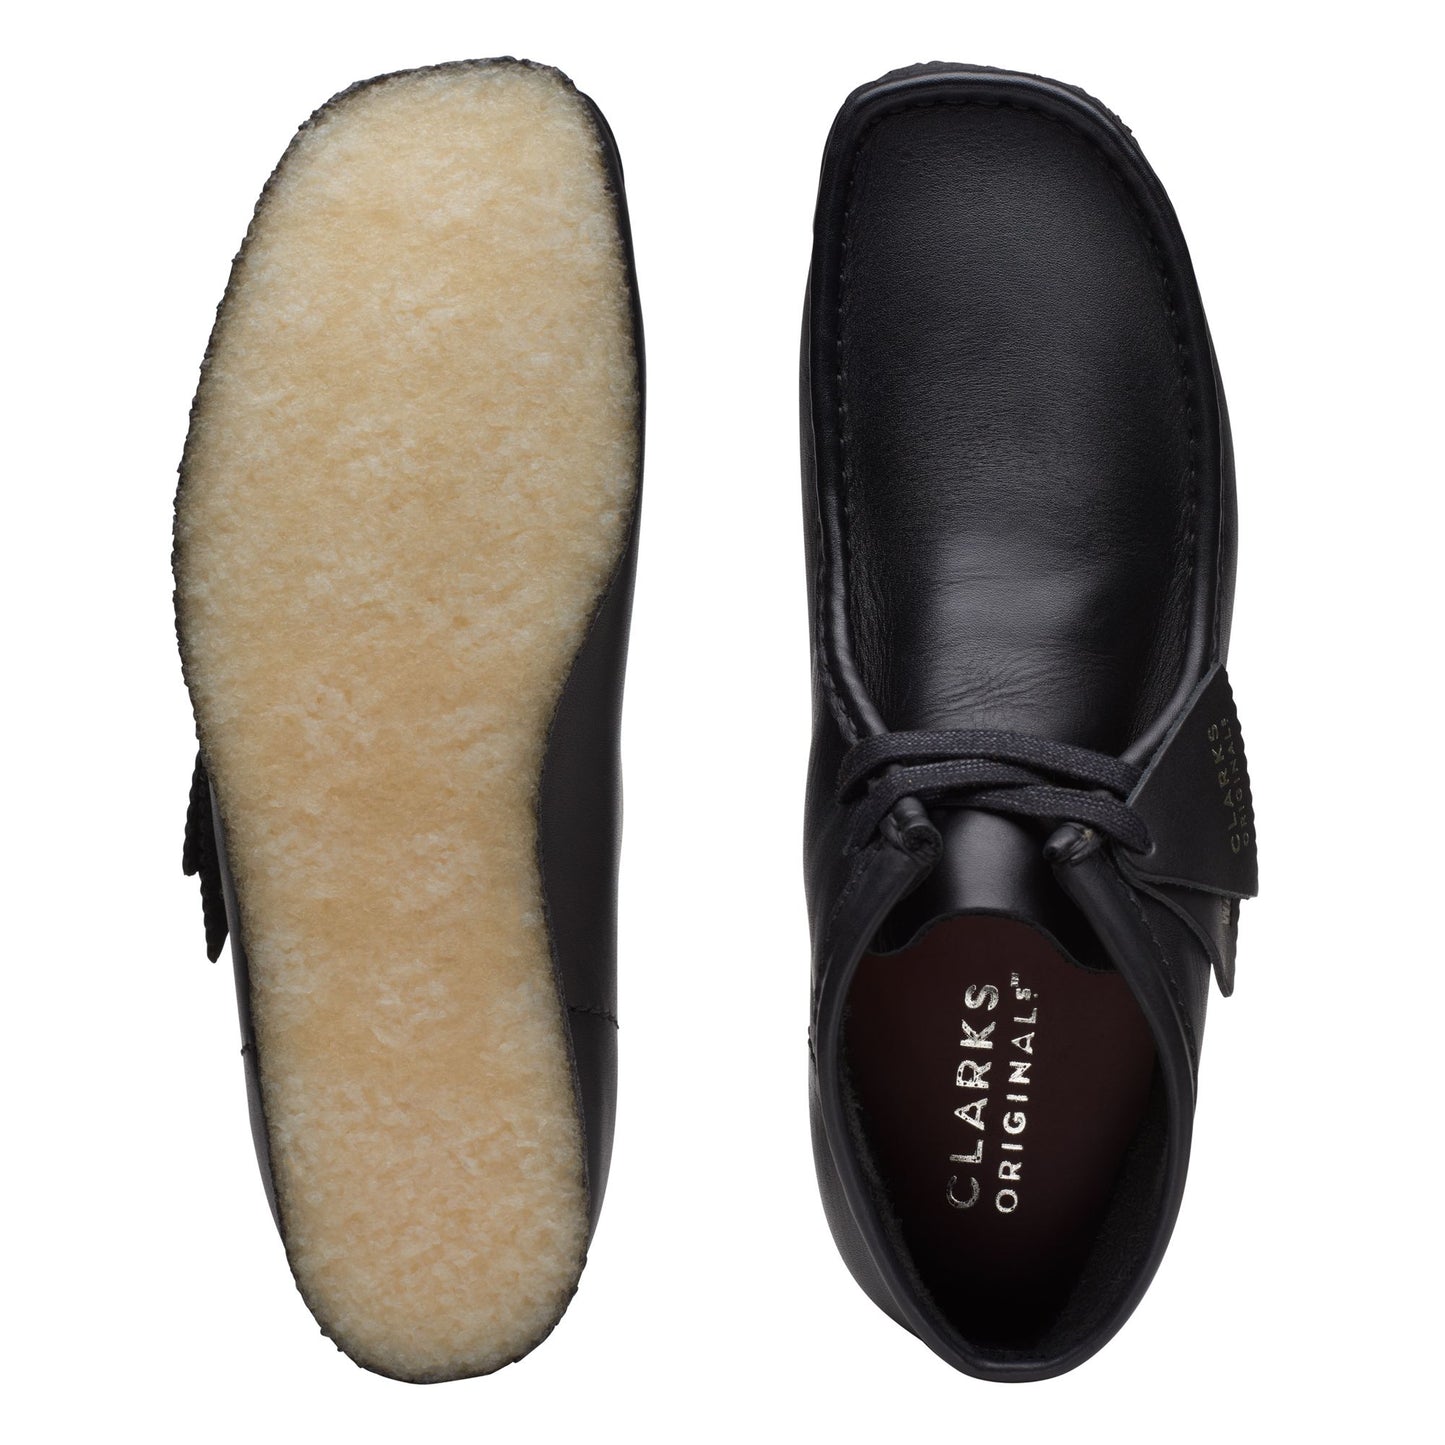 CLARKS WALLABEE BOOT - BLACK LEATHER